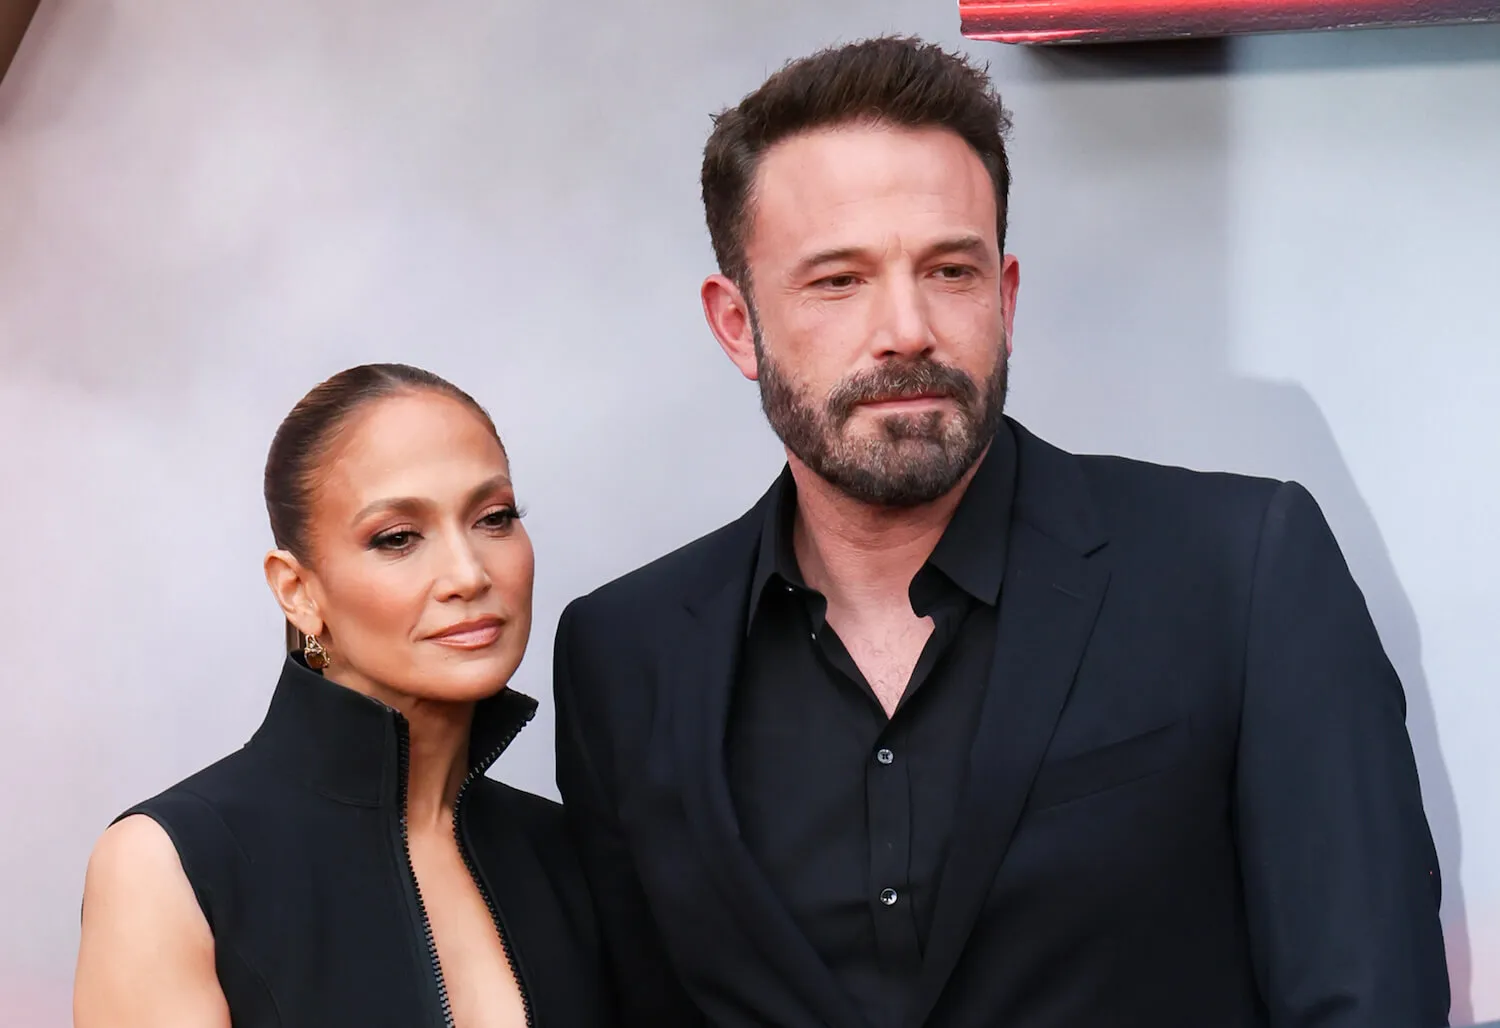 Jennifer Lopez and Ben Affleck standing next to each other at a Los Angeles movie premiere